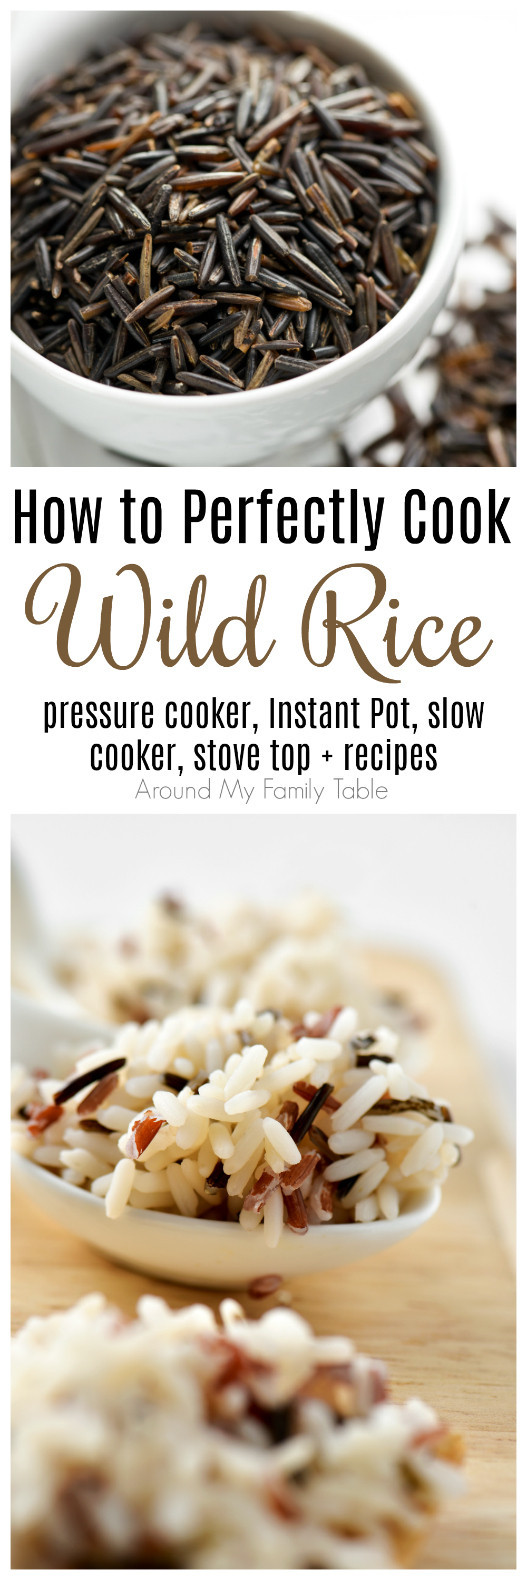 Microwave Wild Rice
 How to Cook Wild Rice Around My Family Table